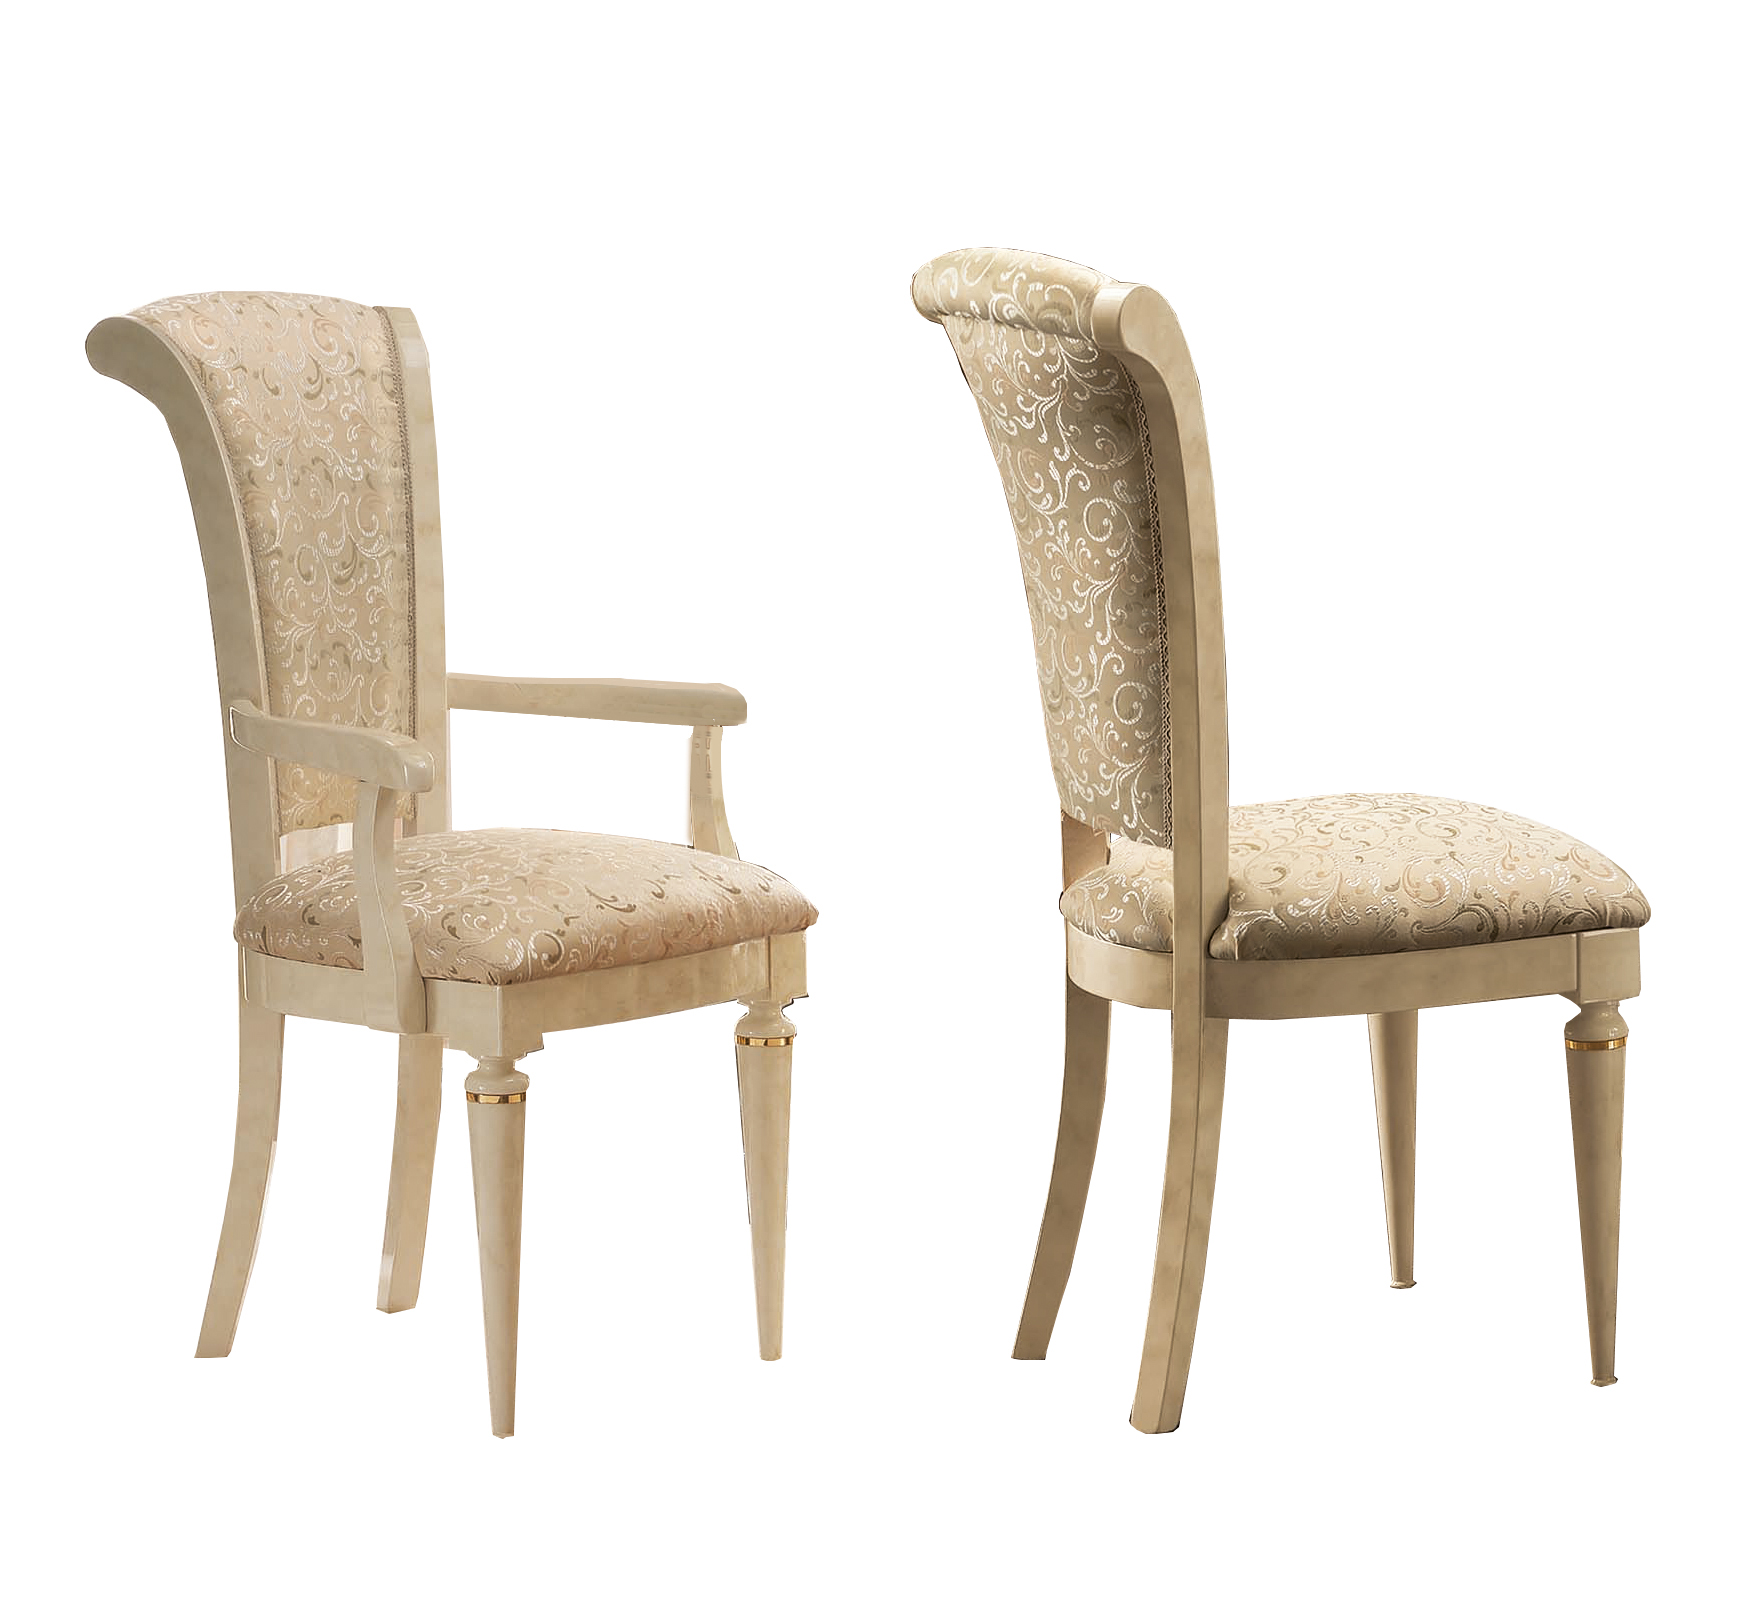 Dining Room Furniture Classic Dining Room Sets Fantasia Chair by Arredoclassic